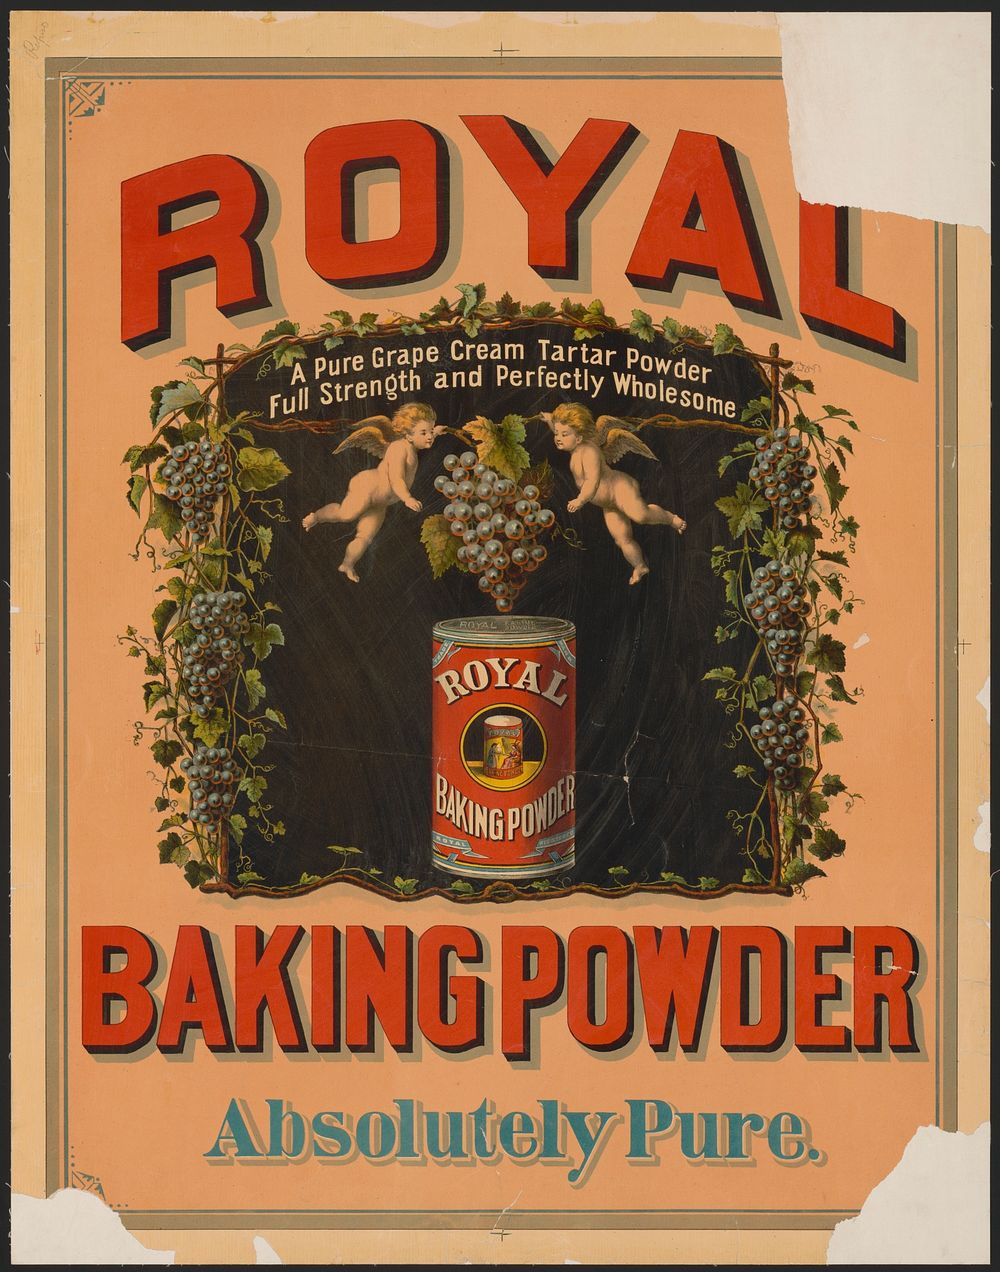 Royal Baking Powder, a pure grape cream tartar powder, full strength and perfectly wholesome